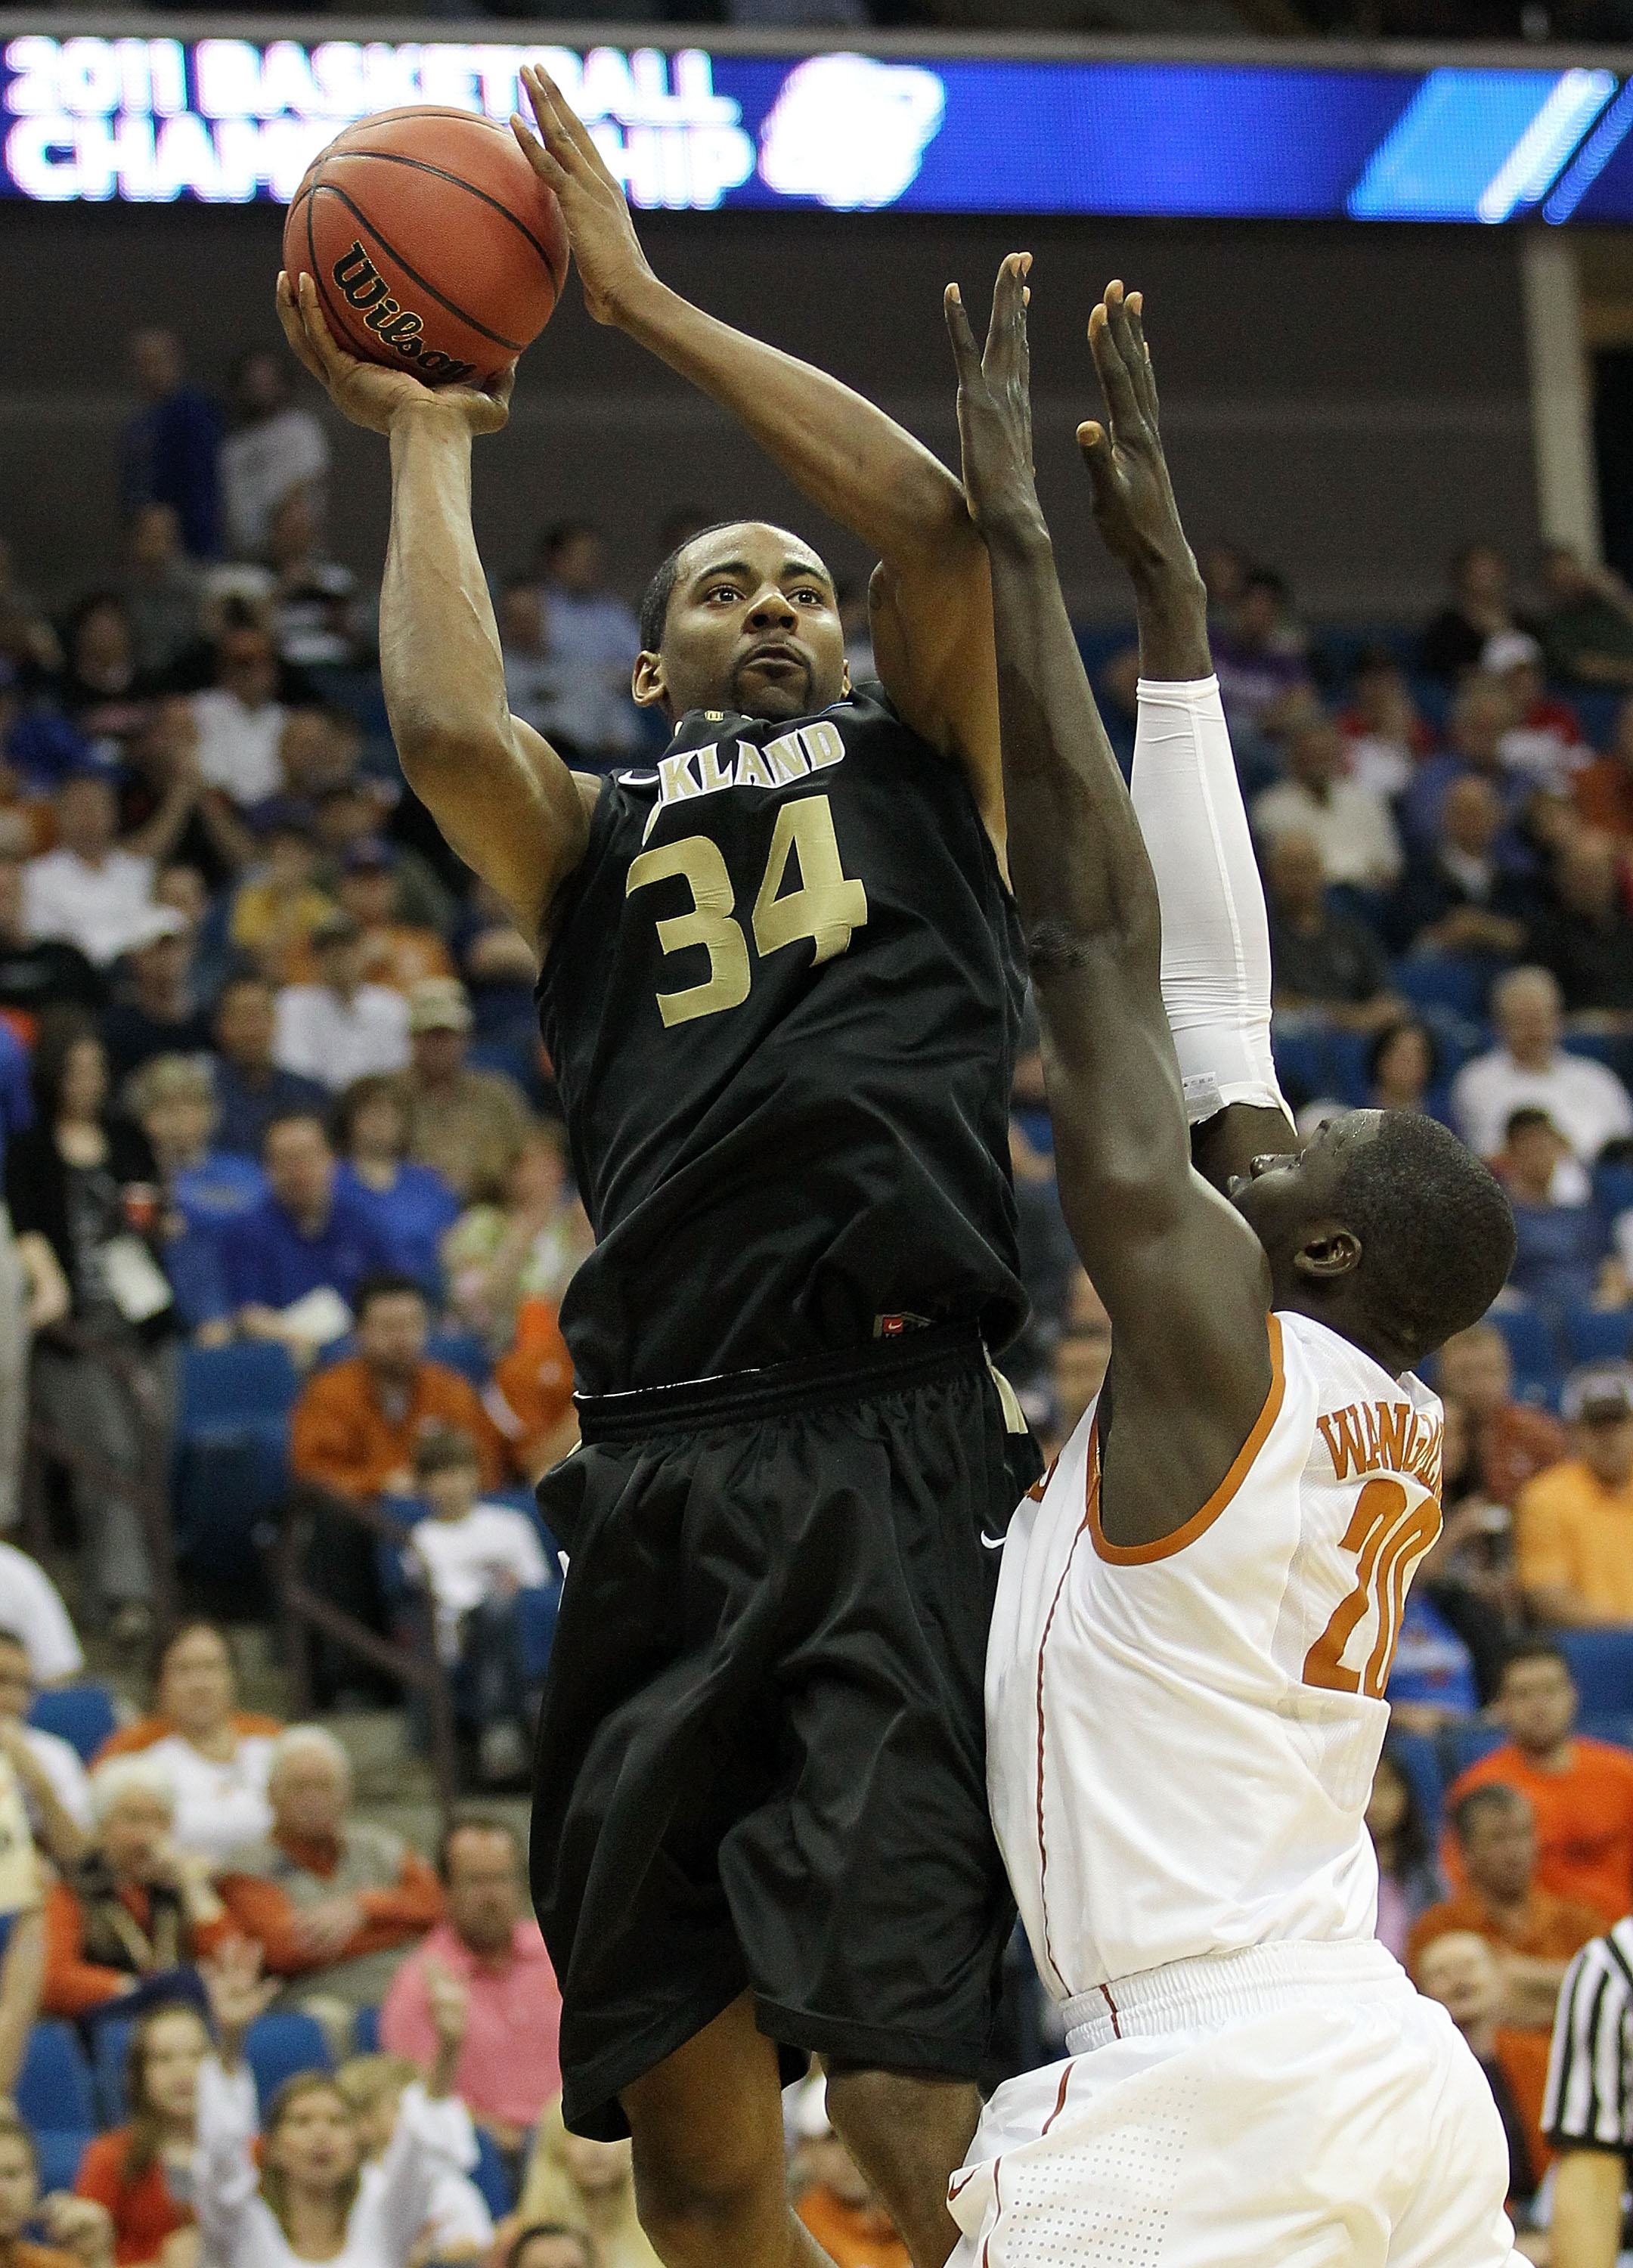 TULSA, OK - MARCH 18:  Keith Benson #34 of the Oakland Golden Grizzlies goes up for a shot against Alexis Wangmene #20 of the Texas Longhorns during the second round game of the 2011 NCAA men's basketball tournament at BOK Center on March 18, 2011 in Tuls